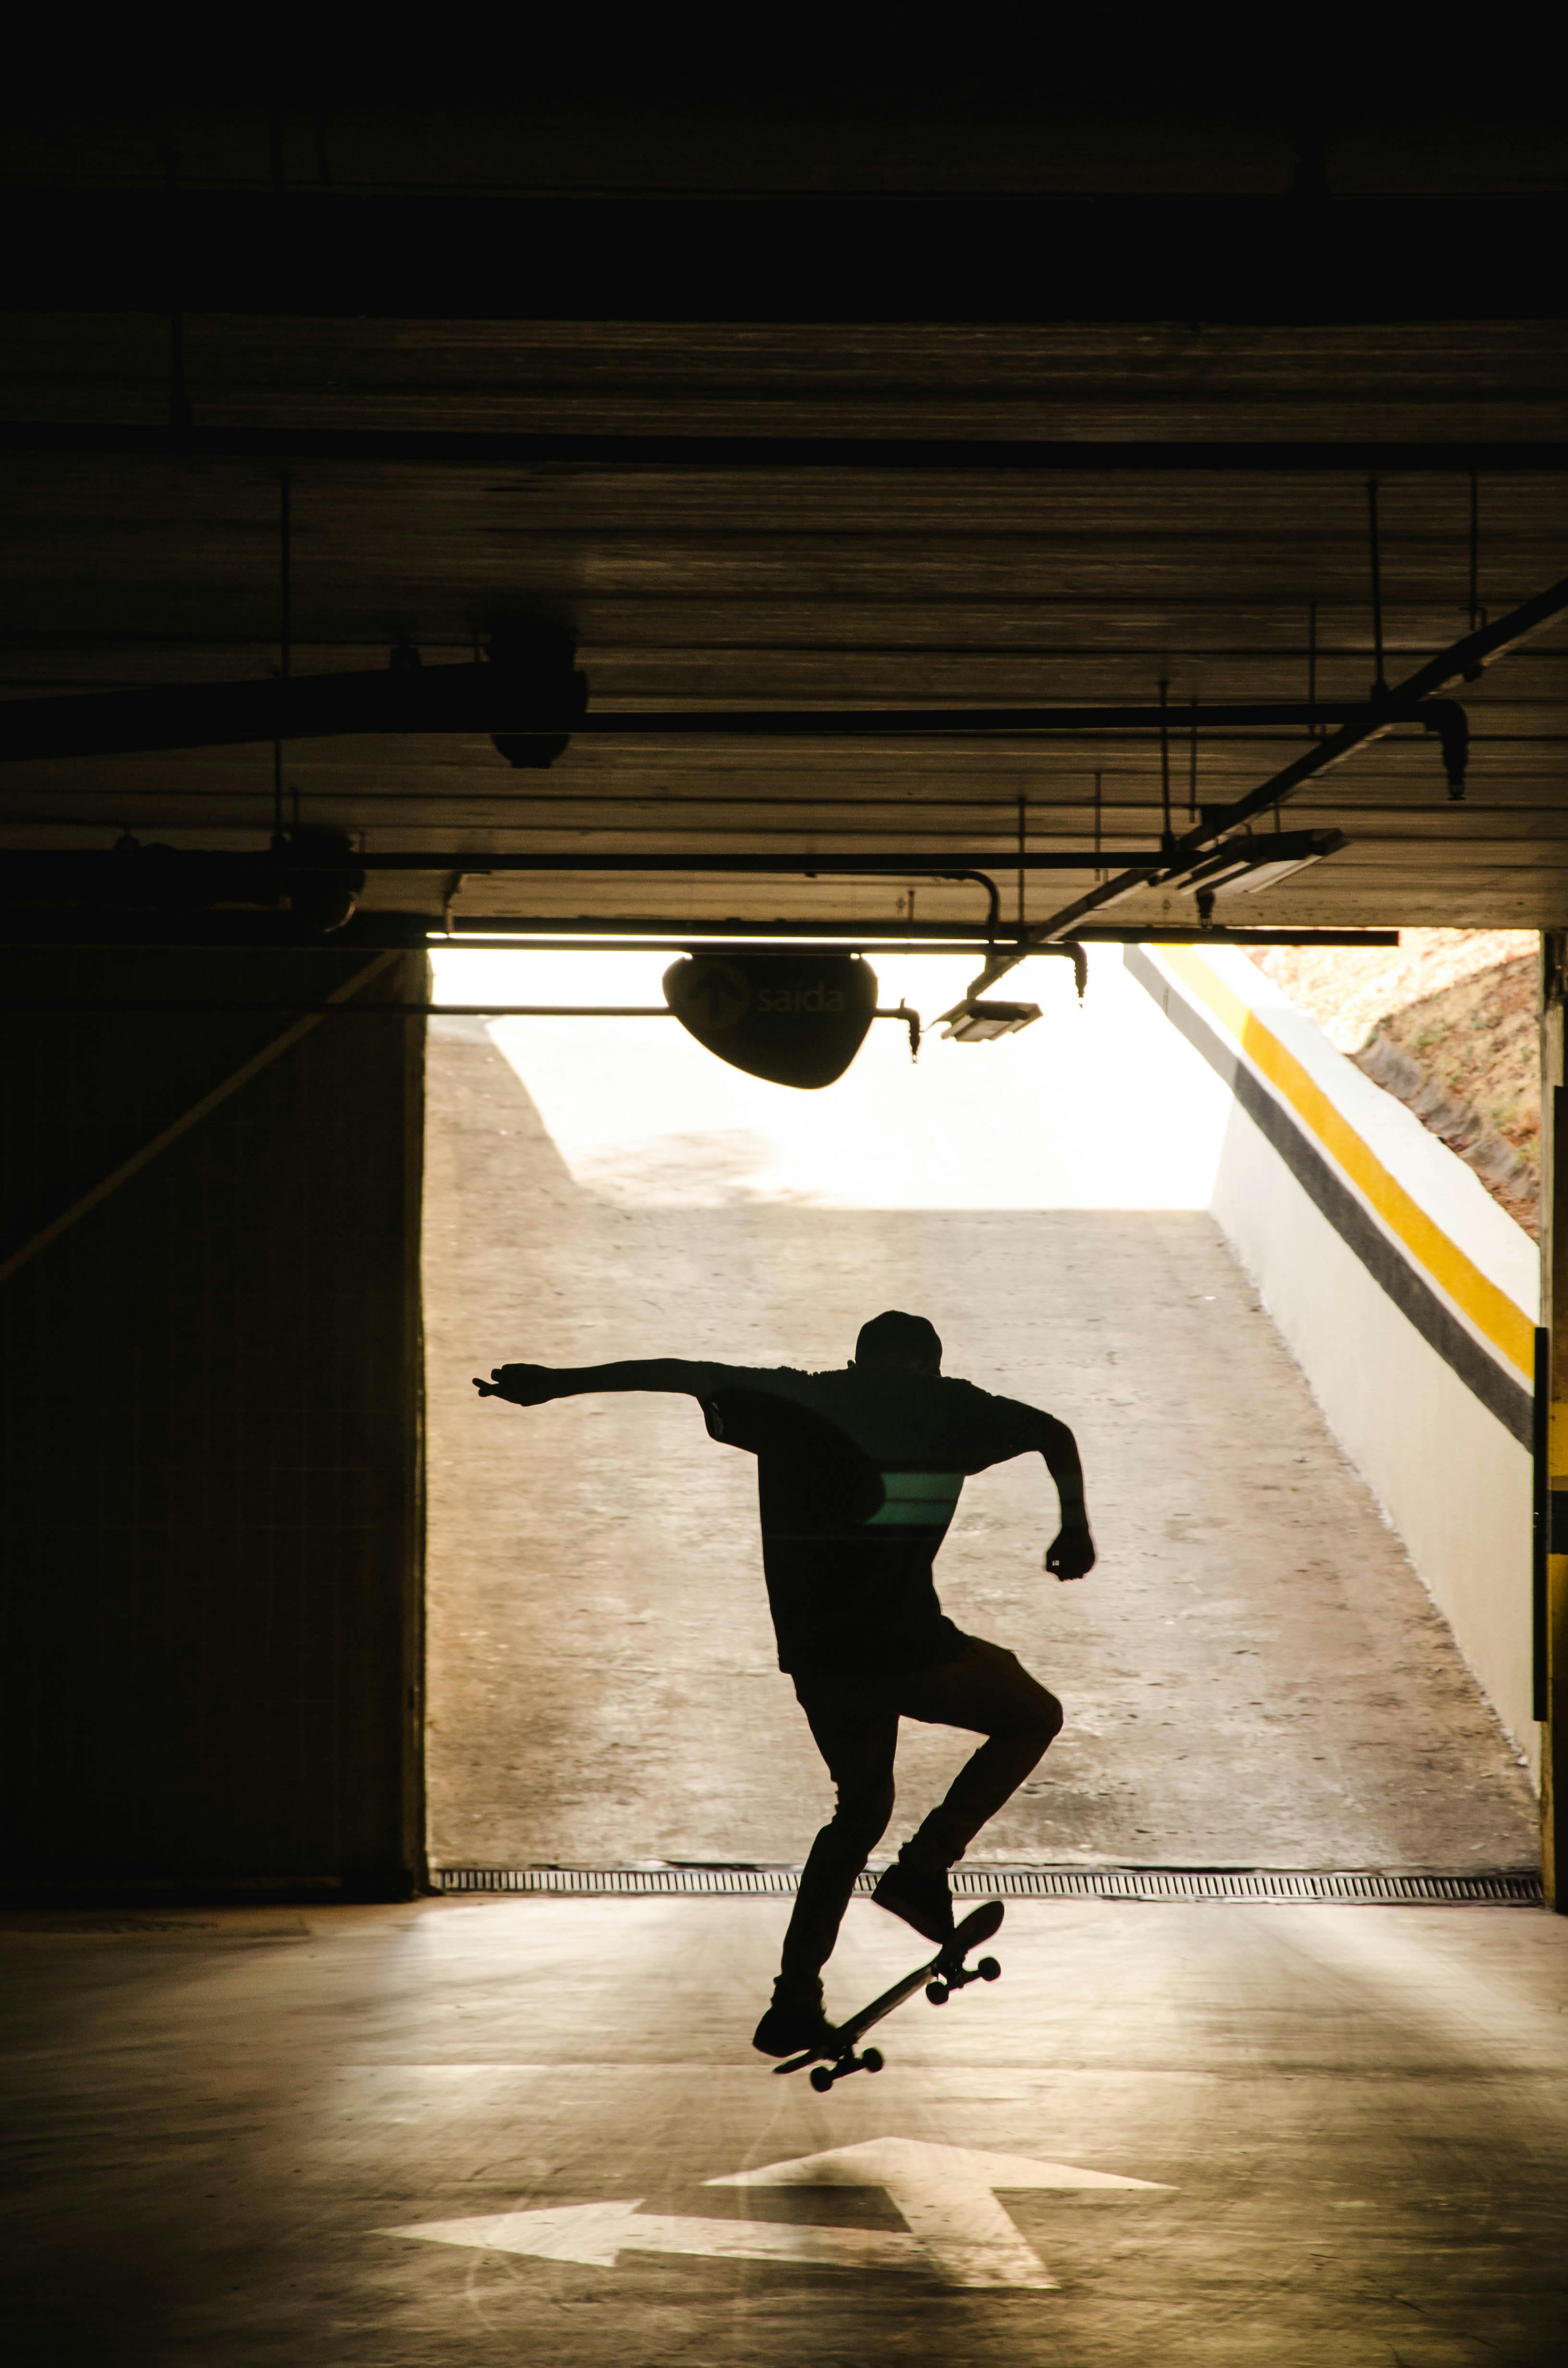 70 Skateboarding HD Wallpapers and Backgrounds